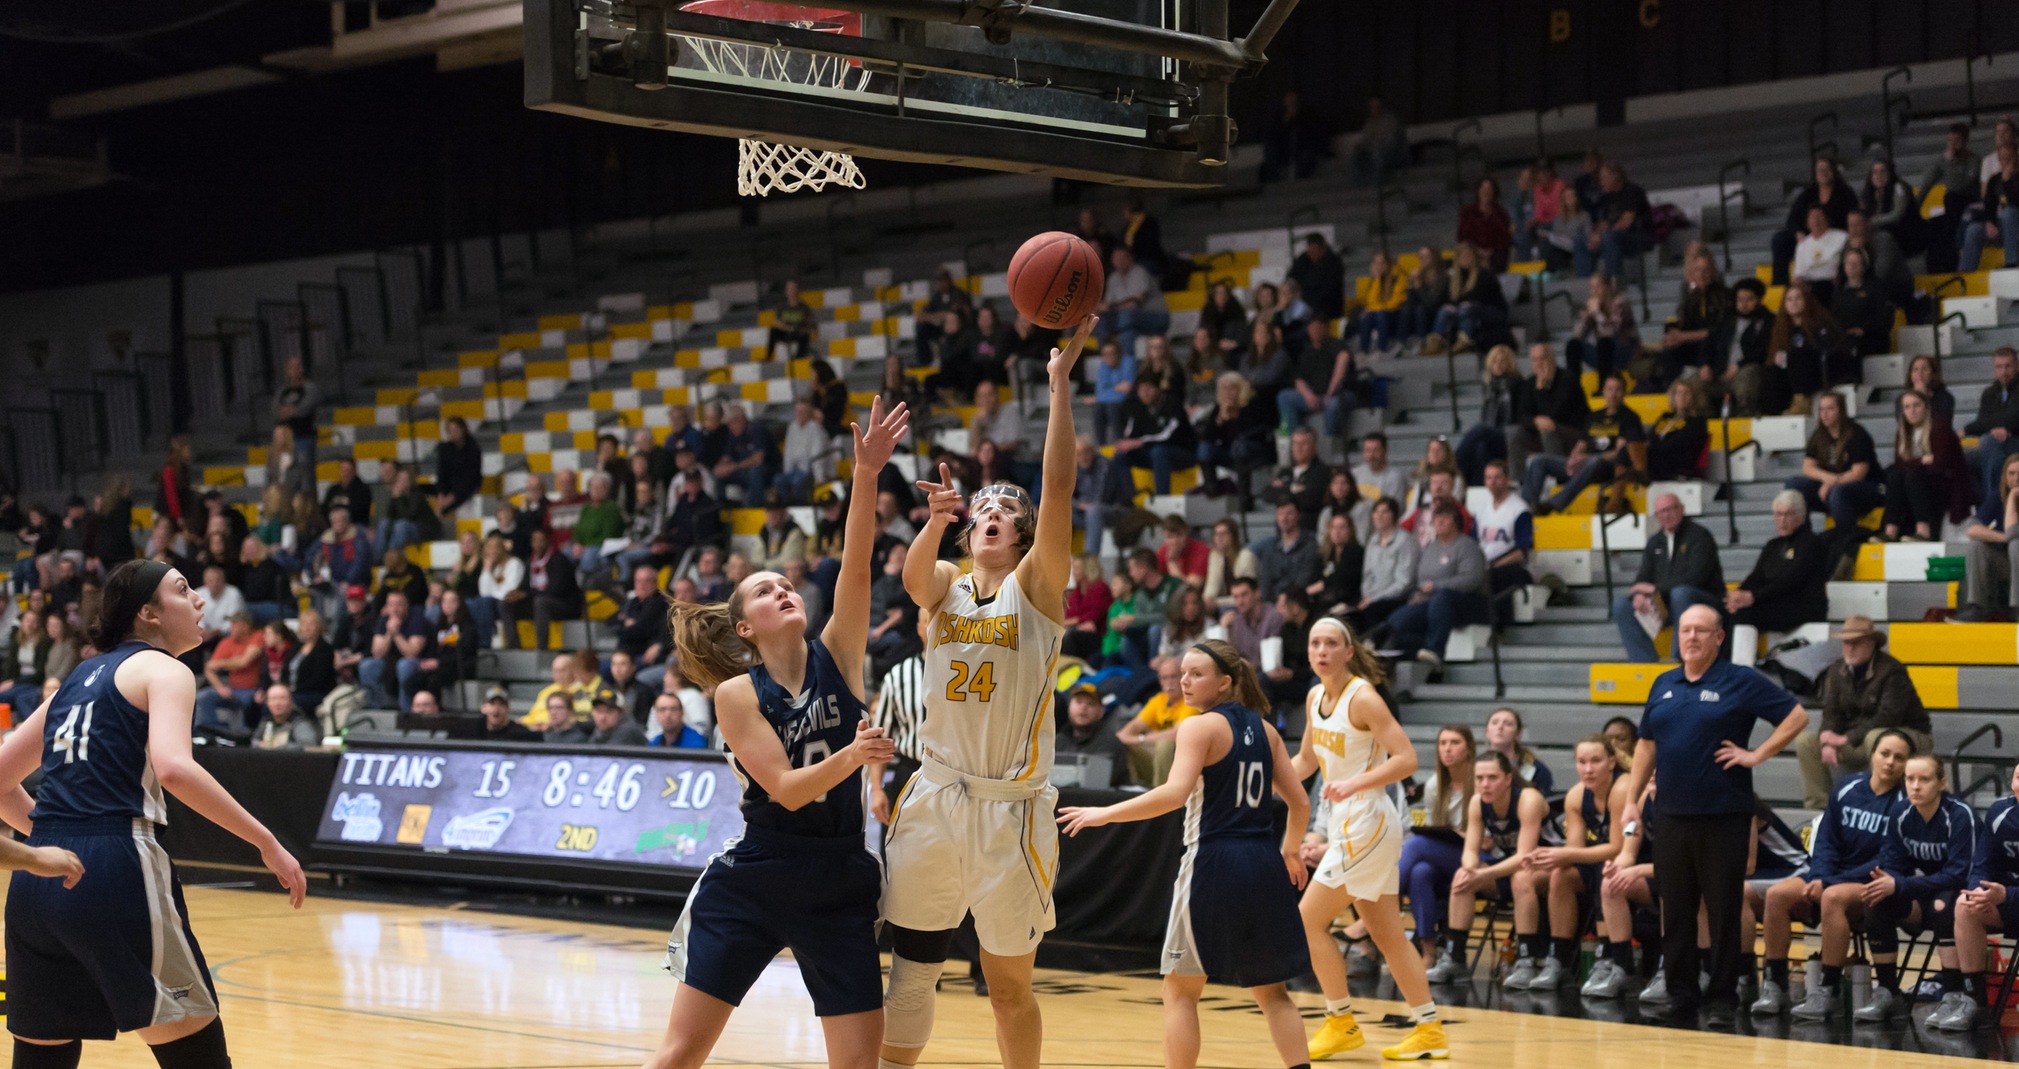 Eliza Campbell scored 16 points, including 12 in the second half, and grabbed nine rebounds against the Blue Devils.